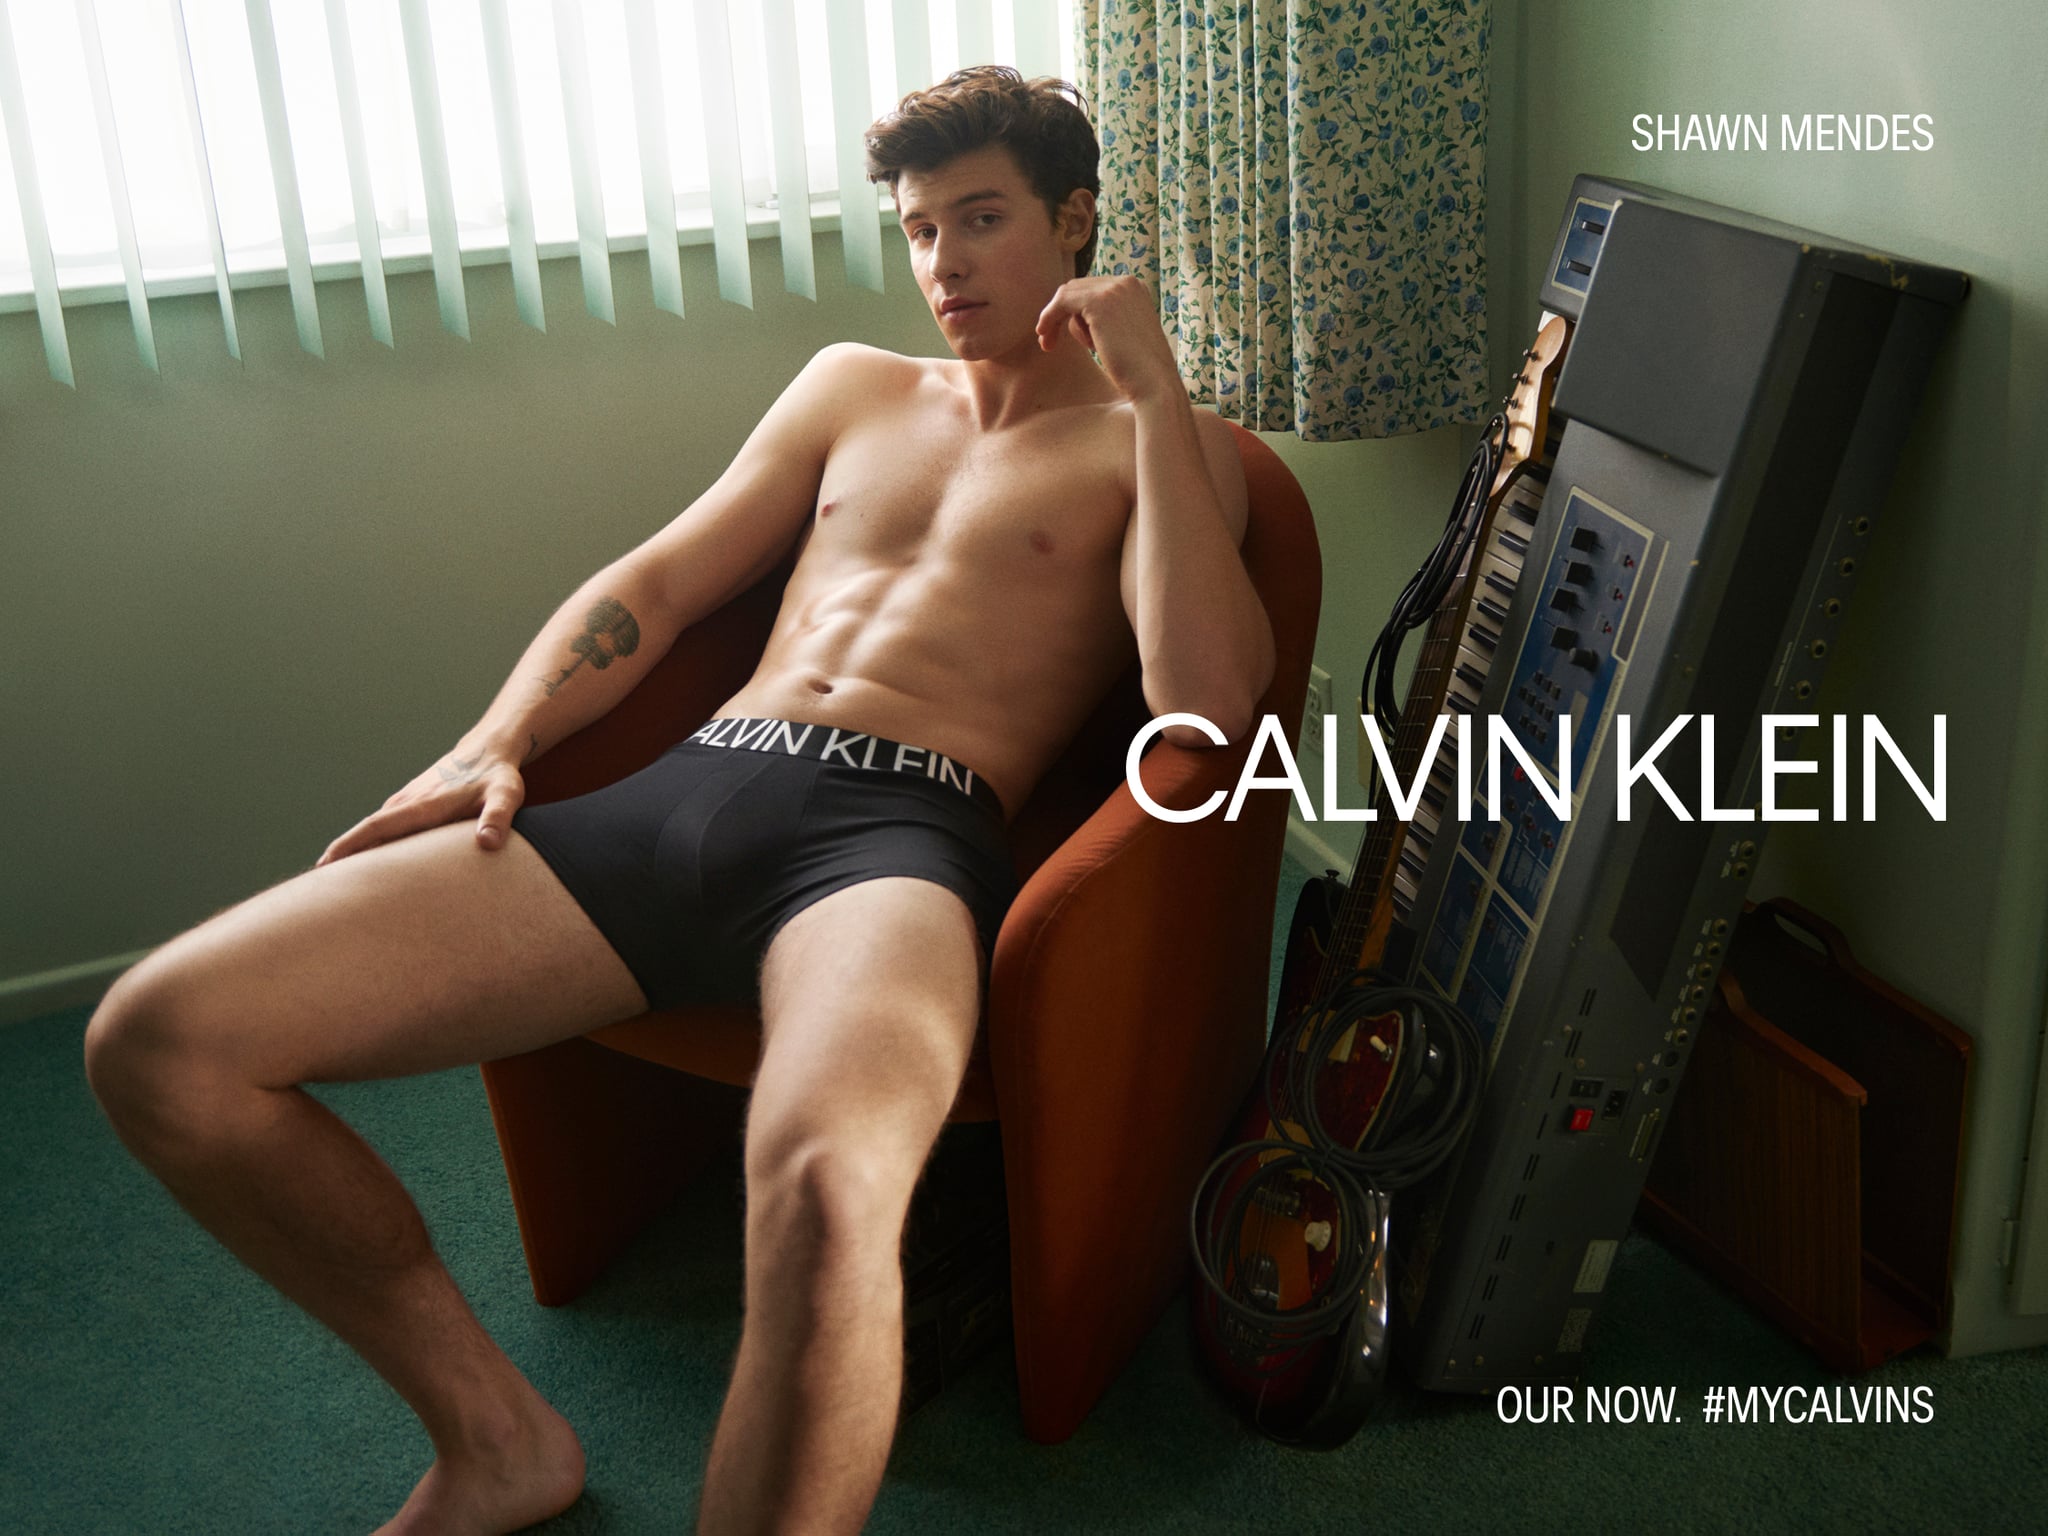 Shawn mendes calvin klein spring campaign pictures celebrity